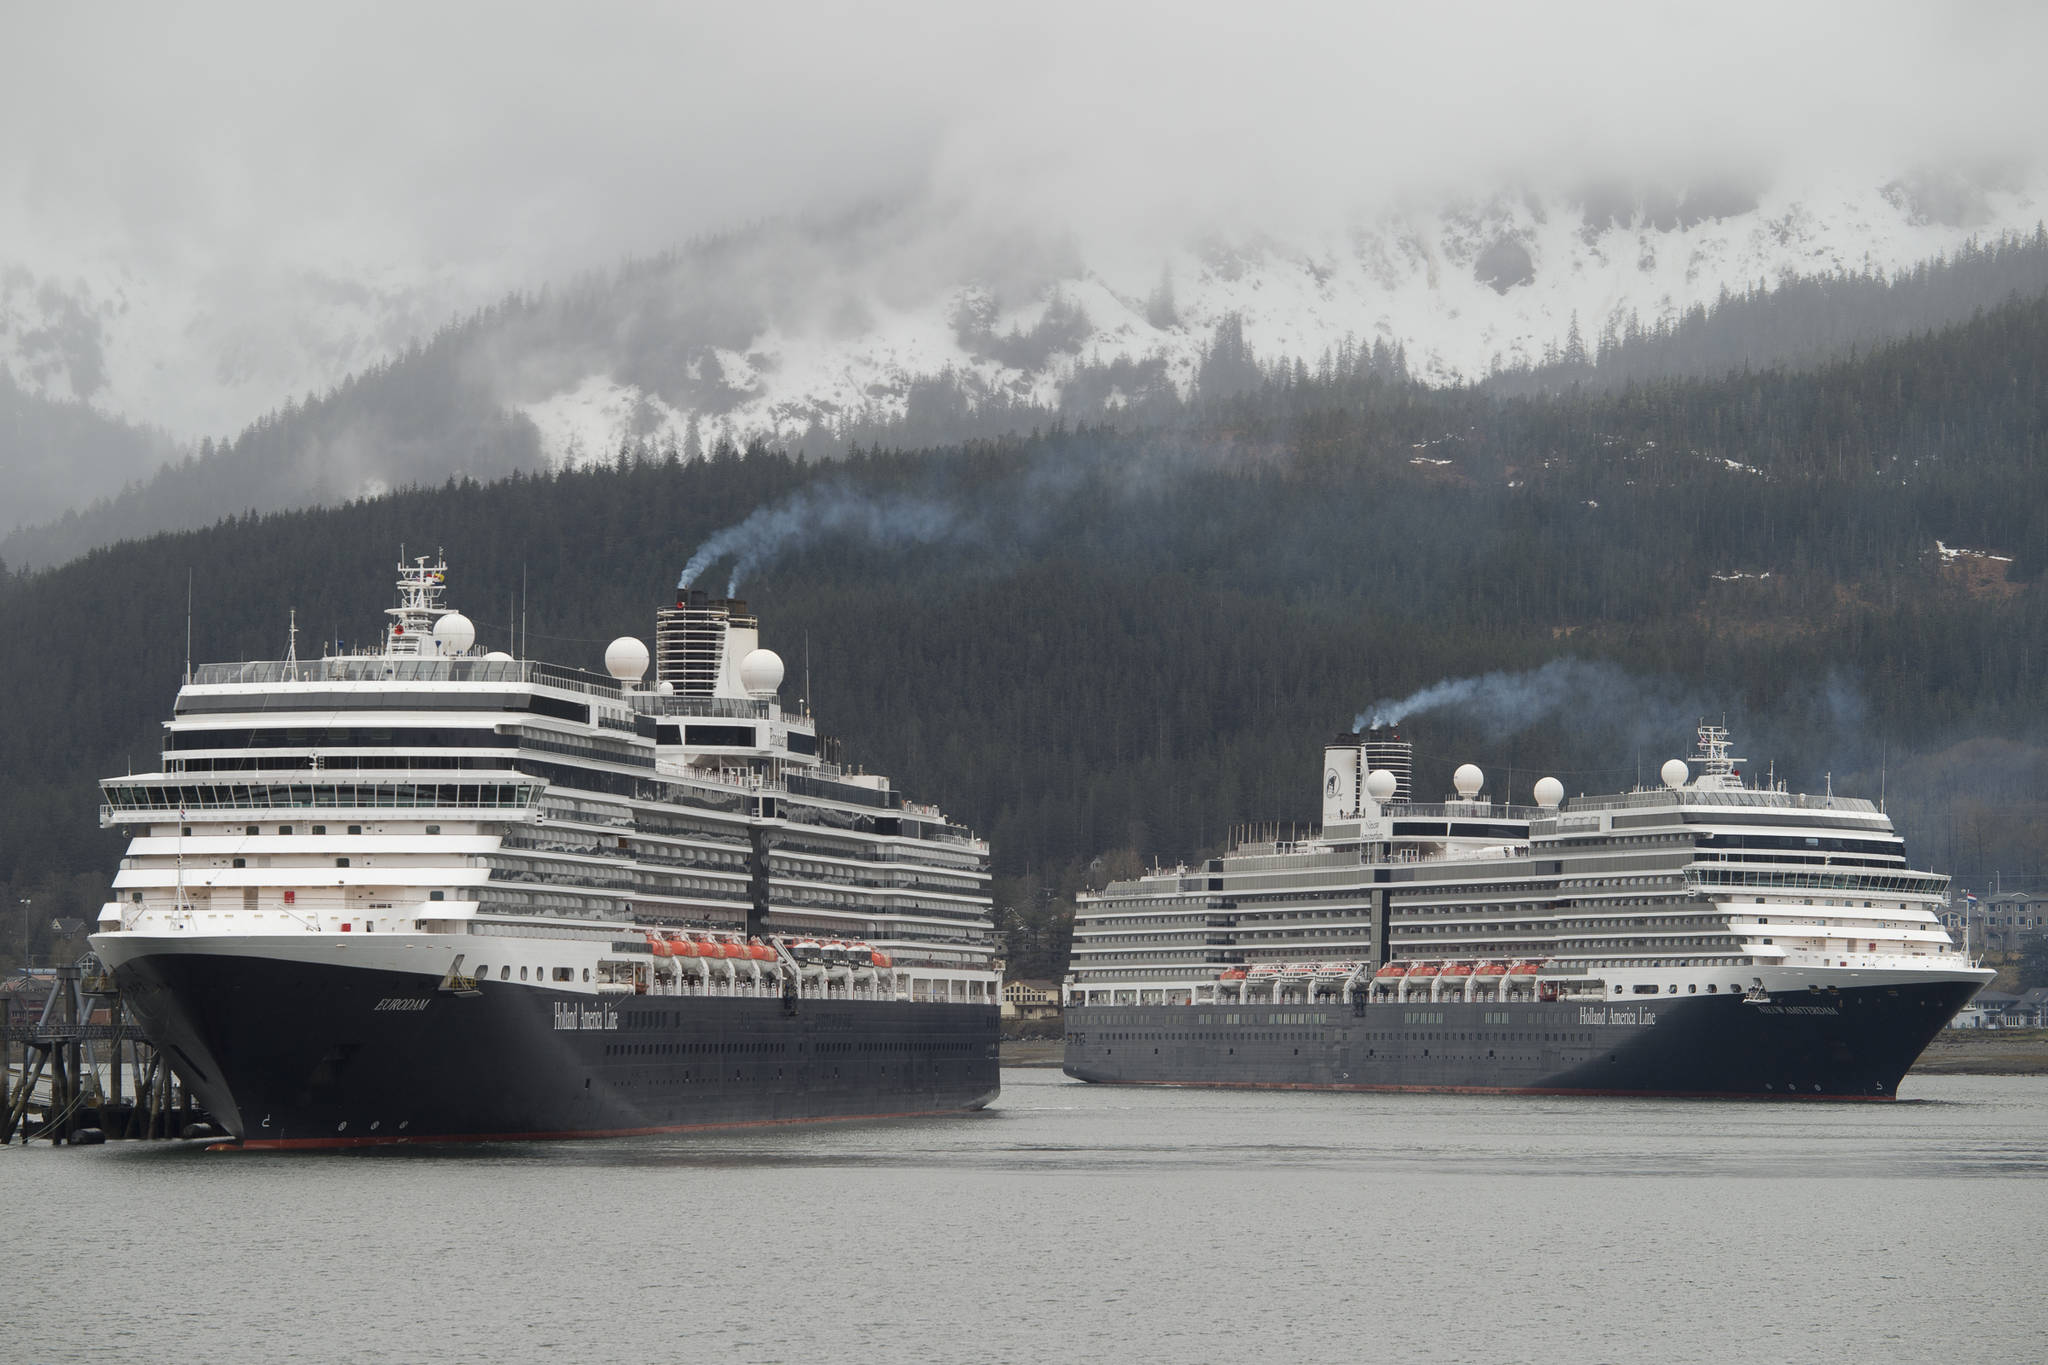 The Holland America Line cruise ships Eurodam, left, and Nieuw Amsterdam pull into Juneau’s downtown harbor on May 1, 2017. (Michael Penn | Juneau Empire)